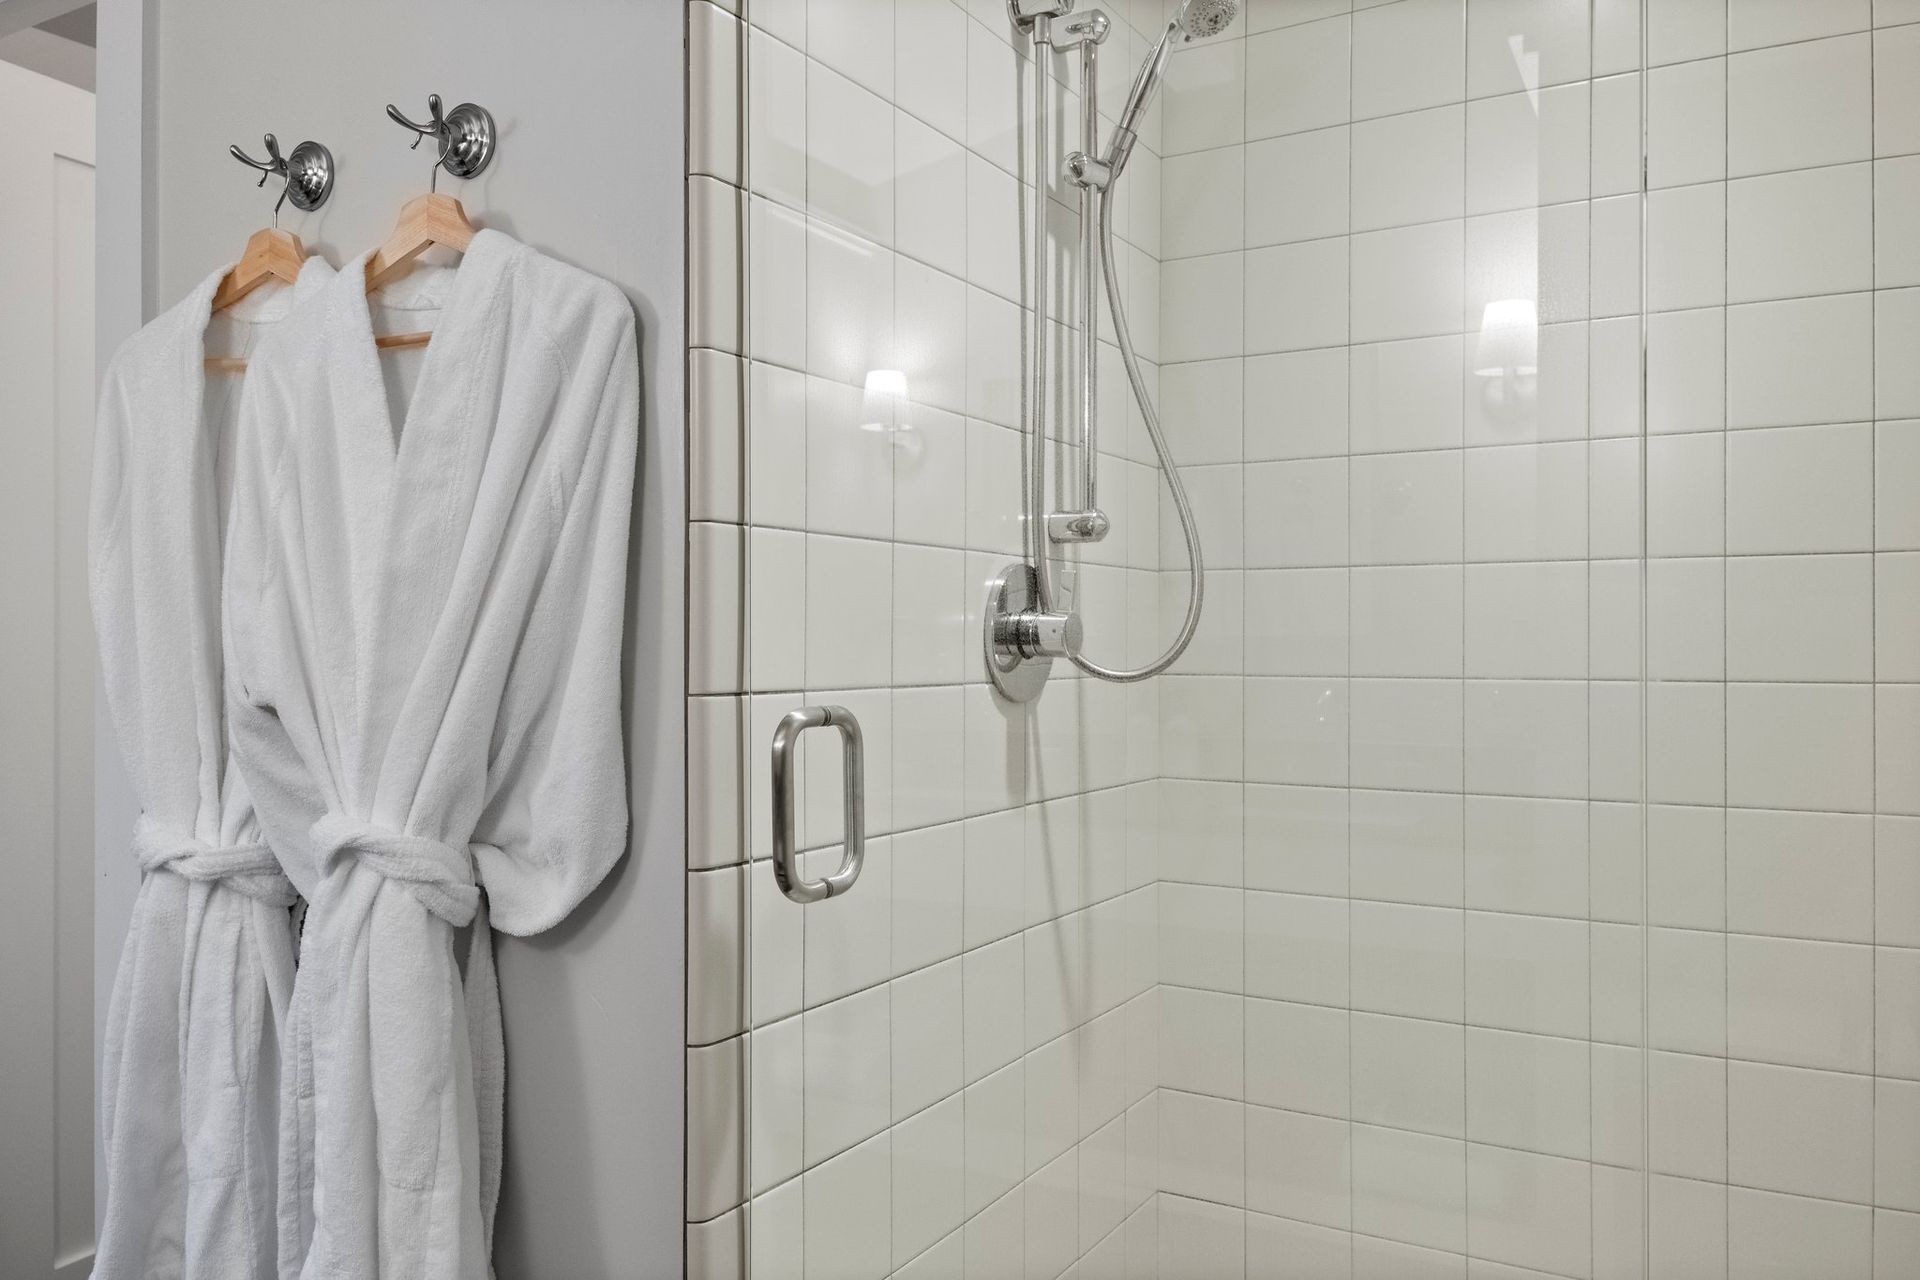 two white robes are hanging in a bathroom next to a shower